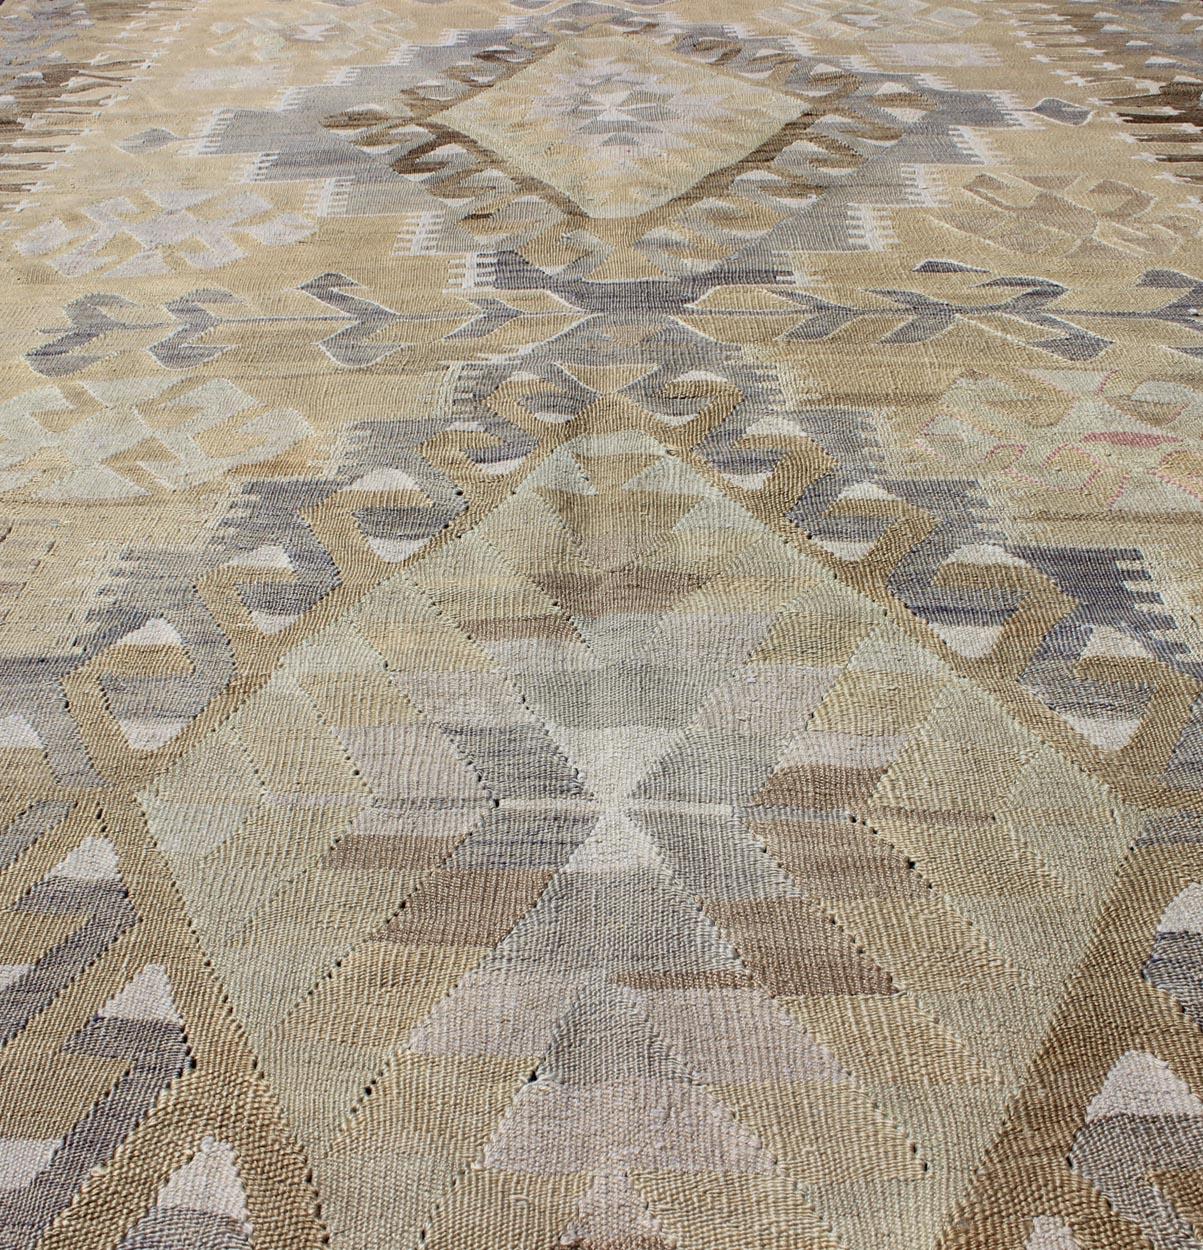 Vintage Tribal Kilim with Geometric Design in Taupe, Honey, Lavender, Gray & Tan For Sale 3